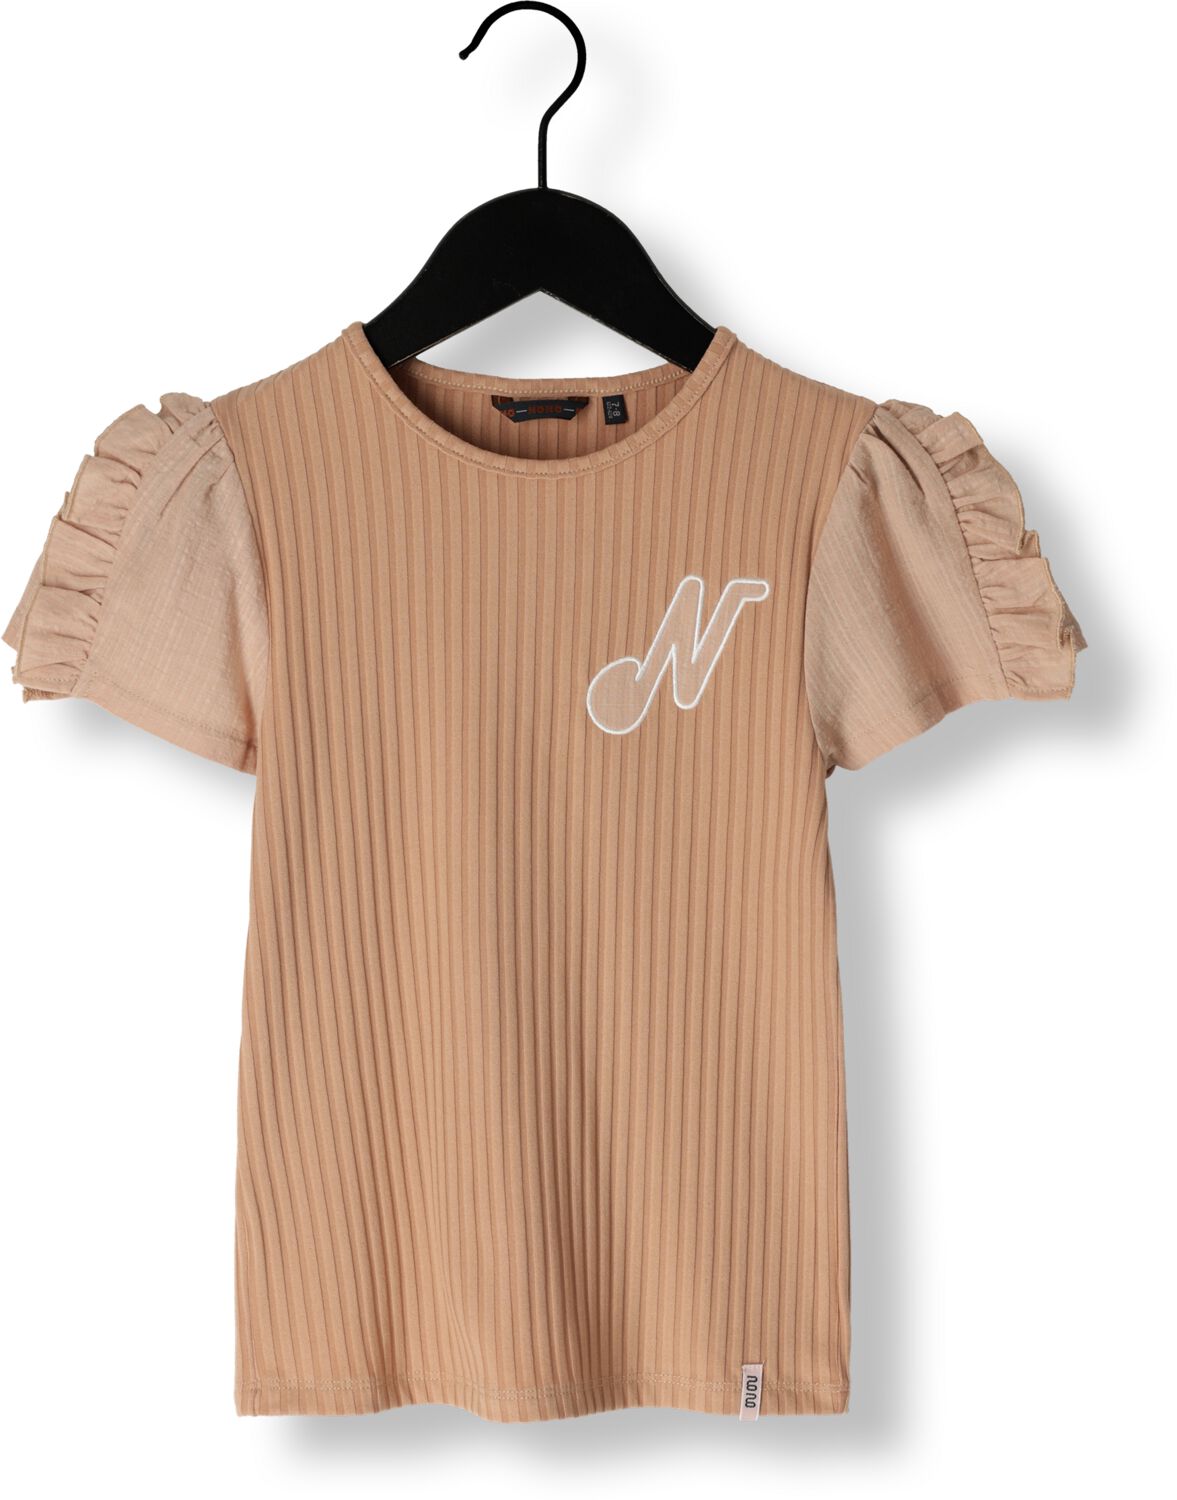 NONO Meisjes Tops & T-shirts Kathleen Tshirt With Fancy Contrast Sleeves Zand